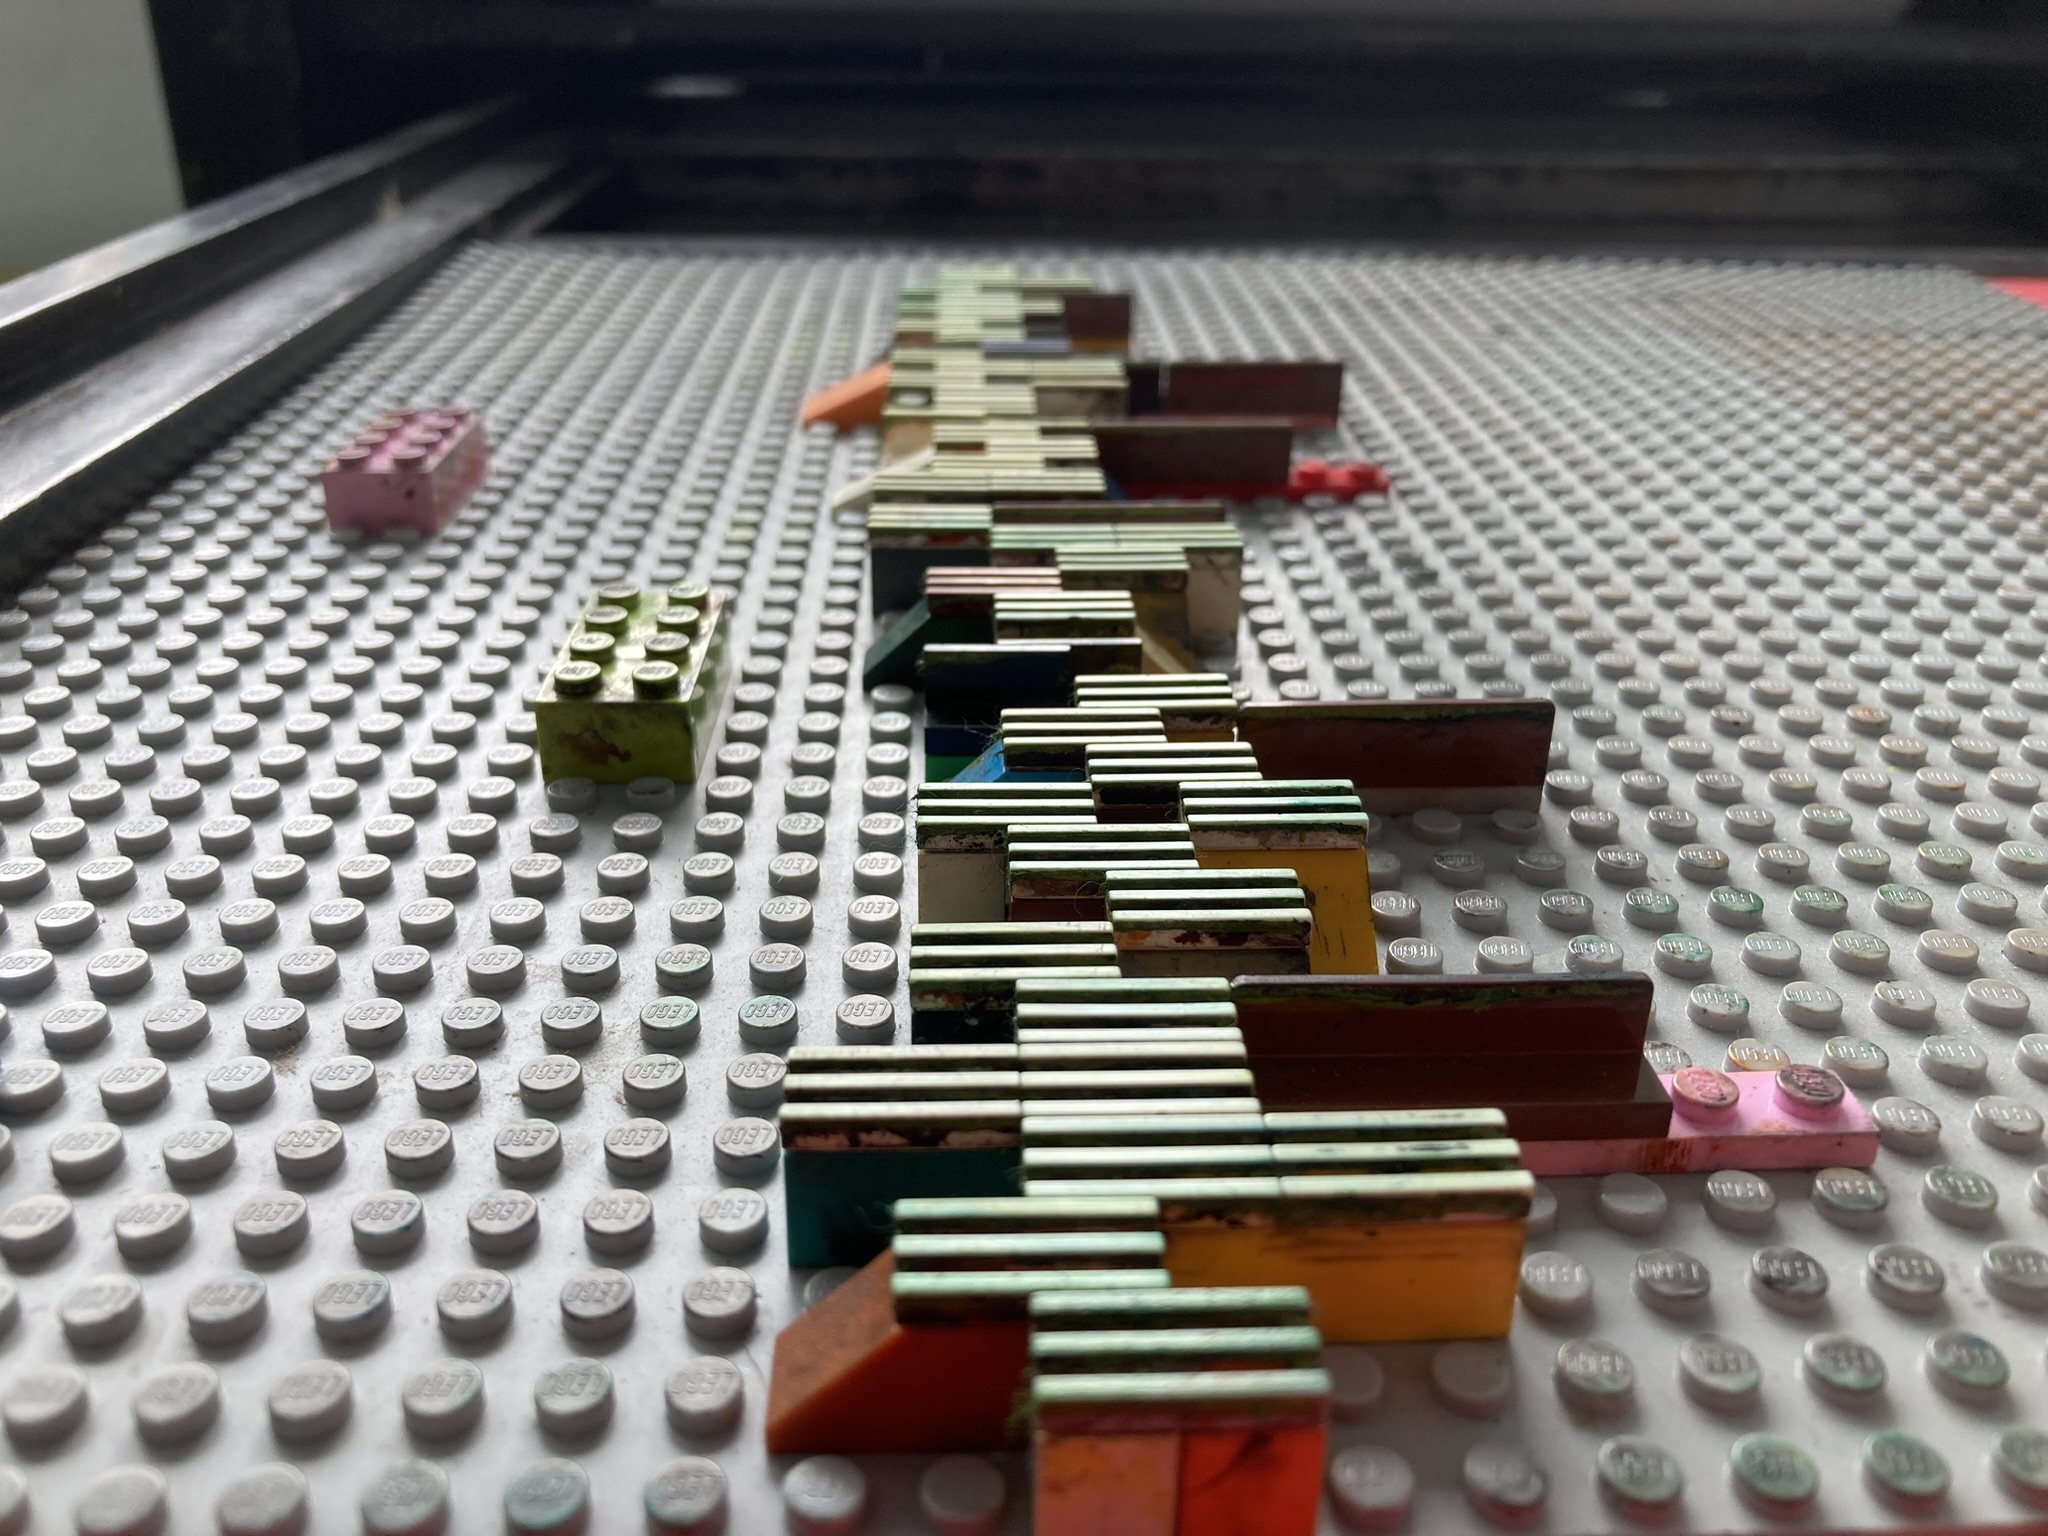 Lego pieces on a base plate, arranged to be printed on a letterpress.